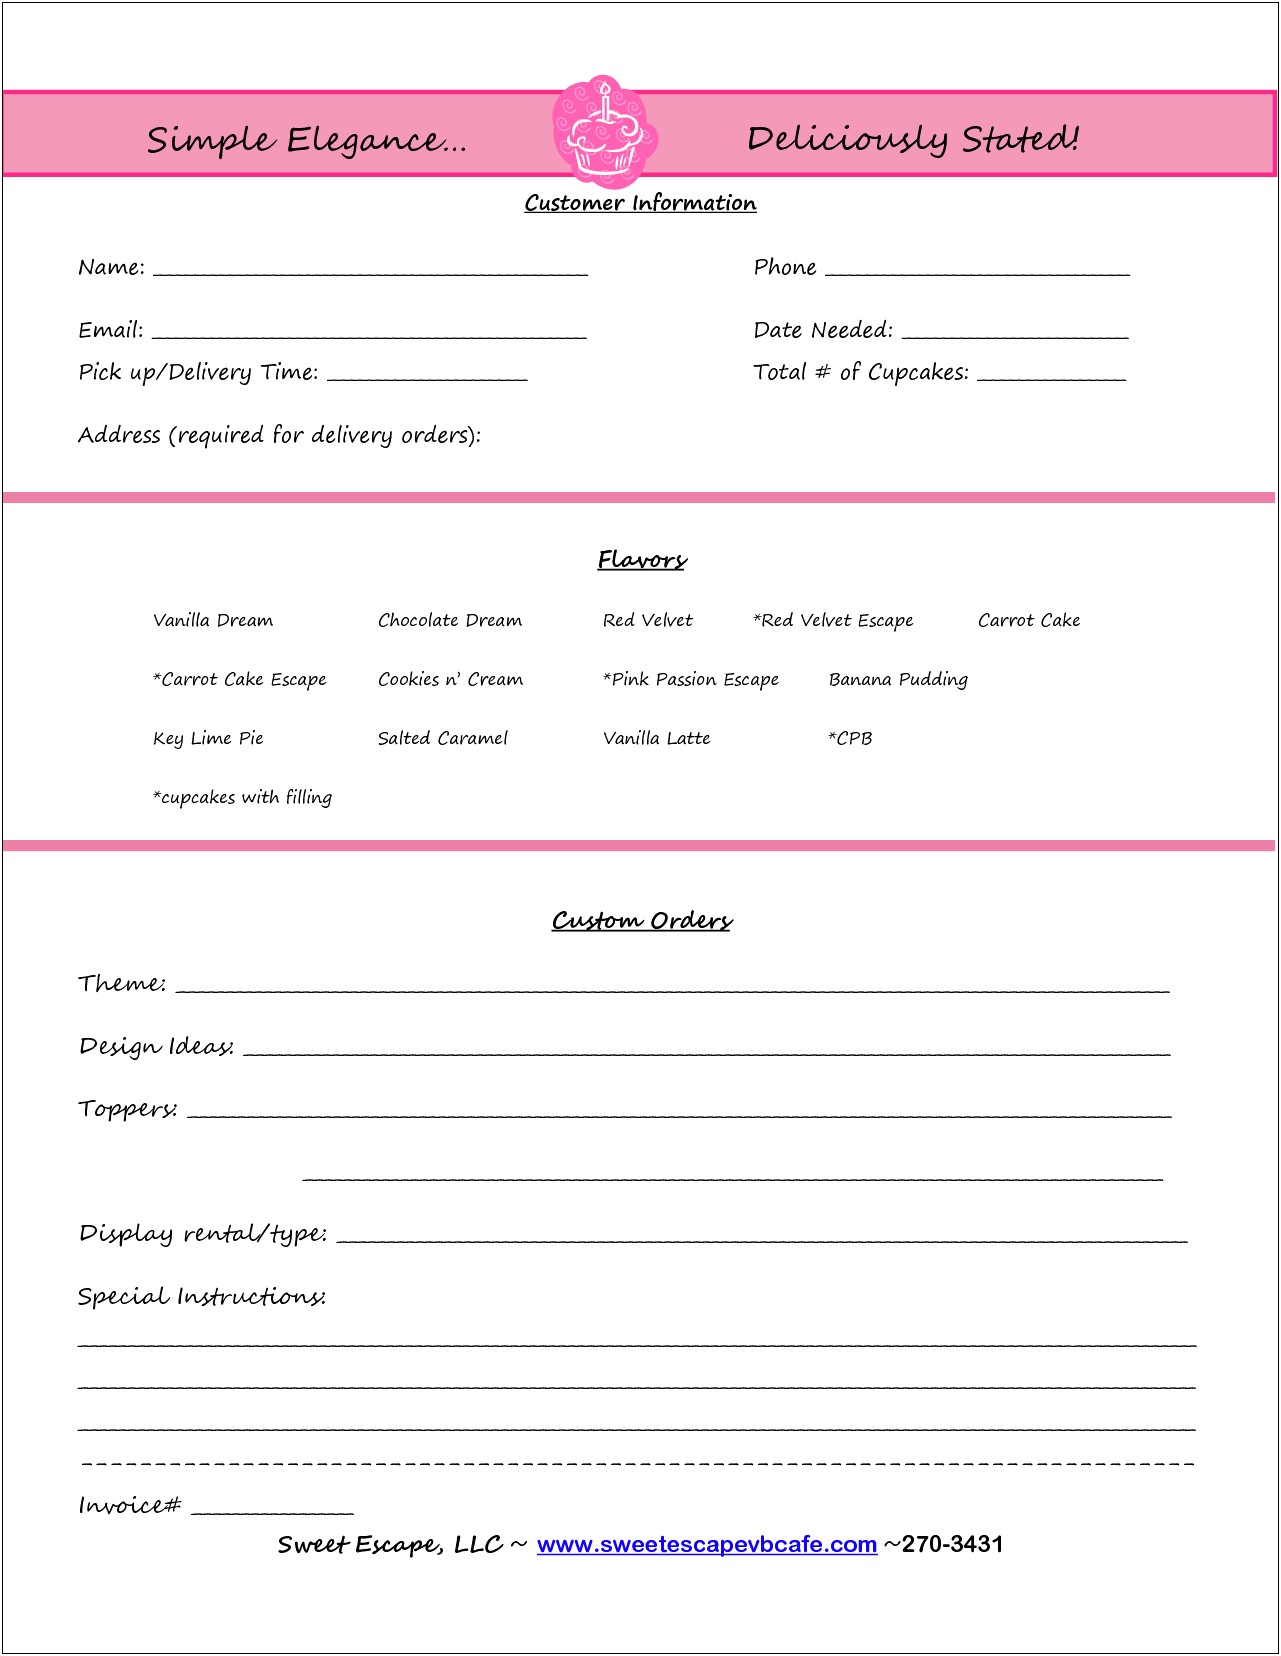 Cake Order Form Template Free Download